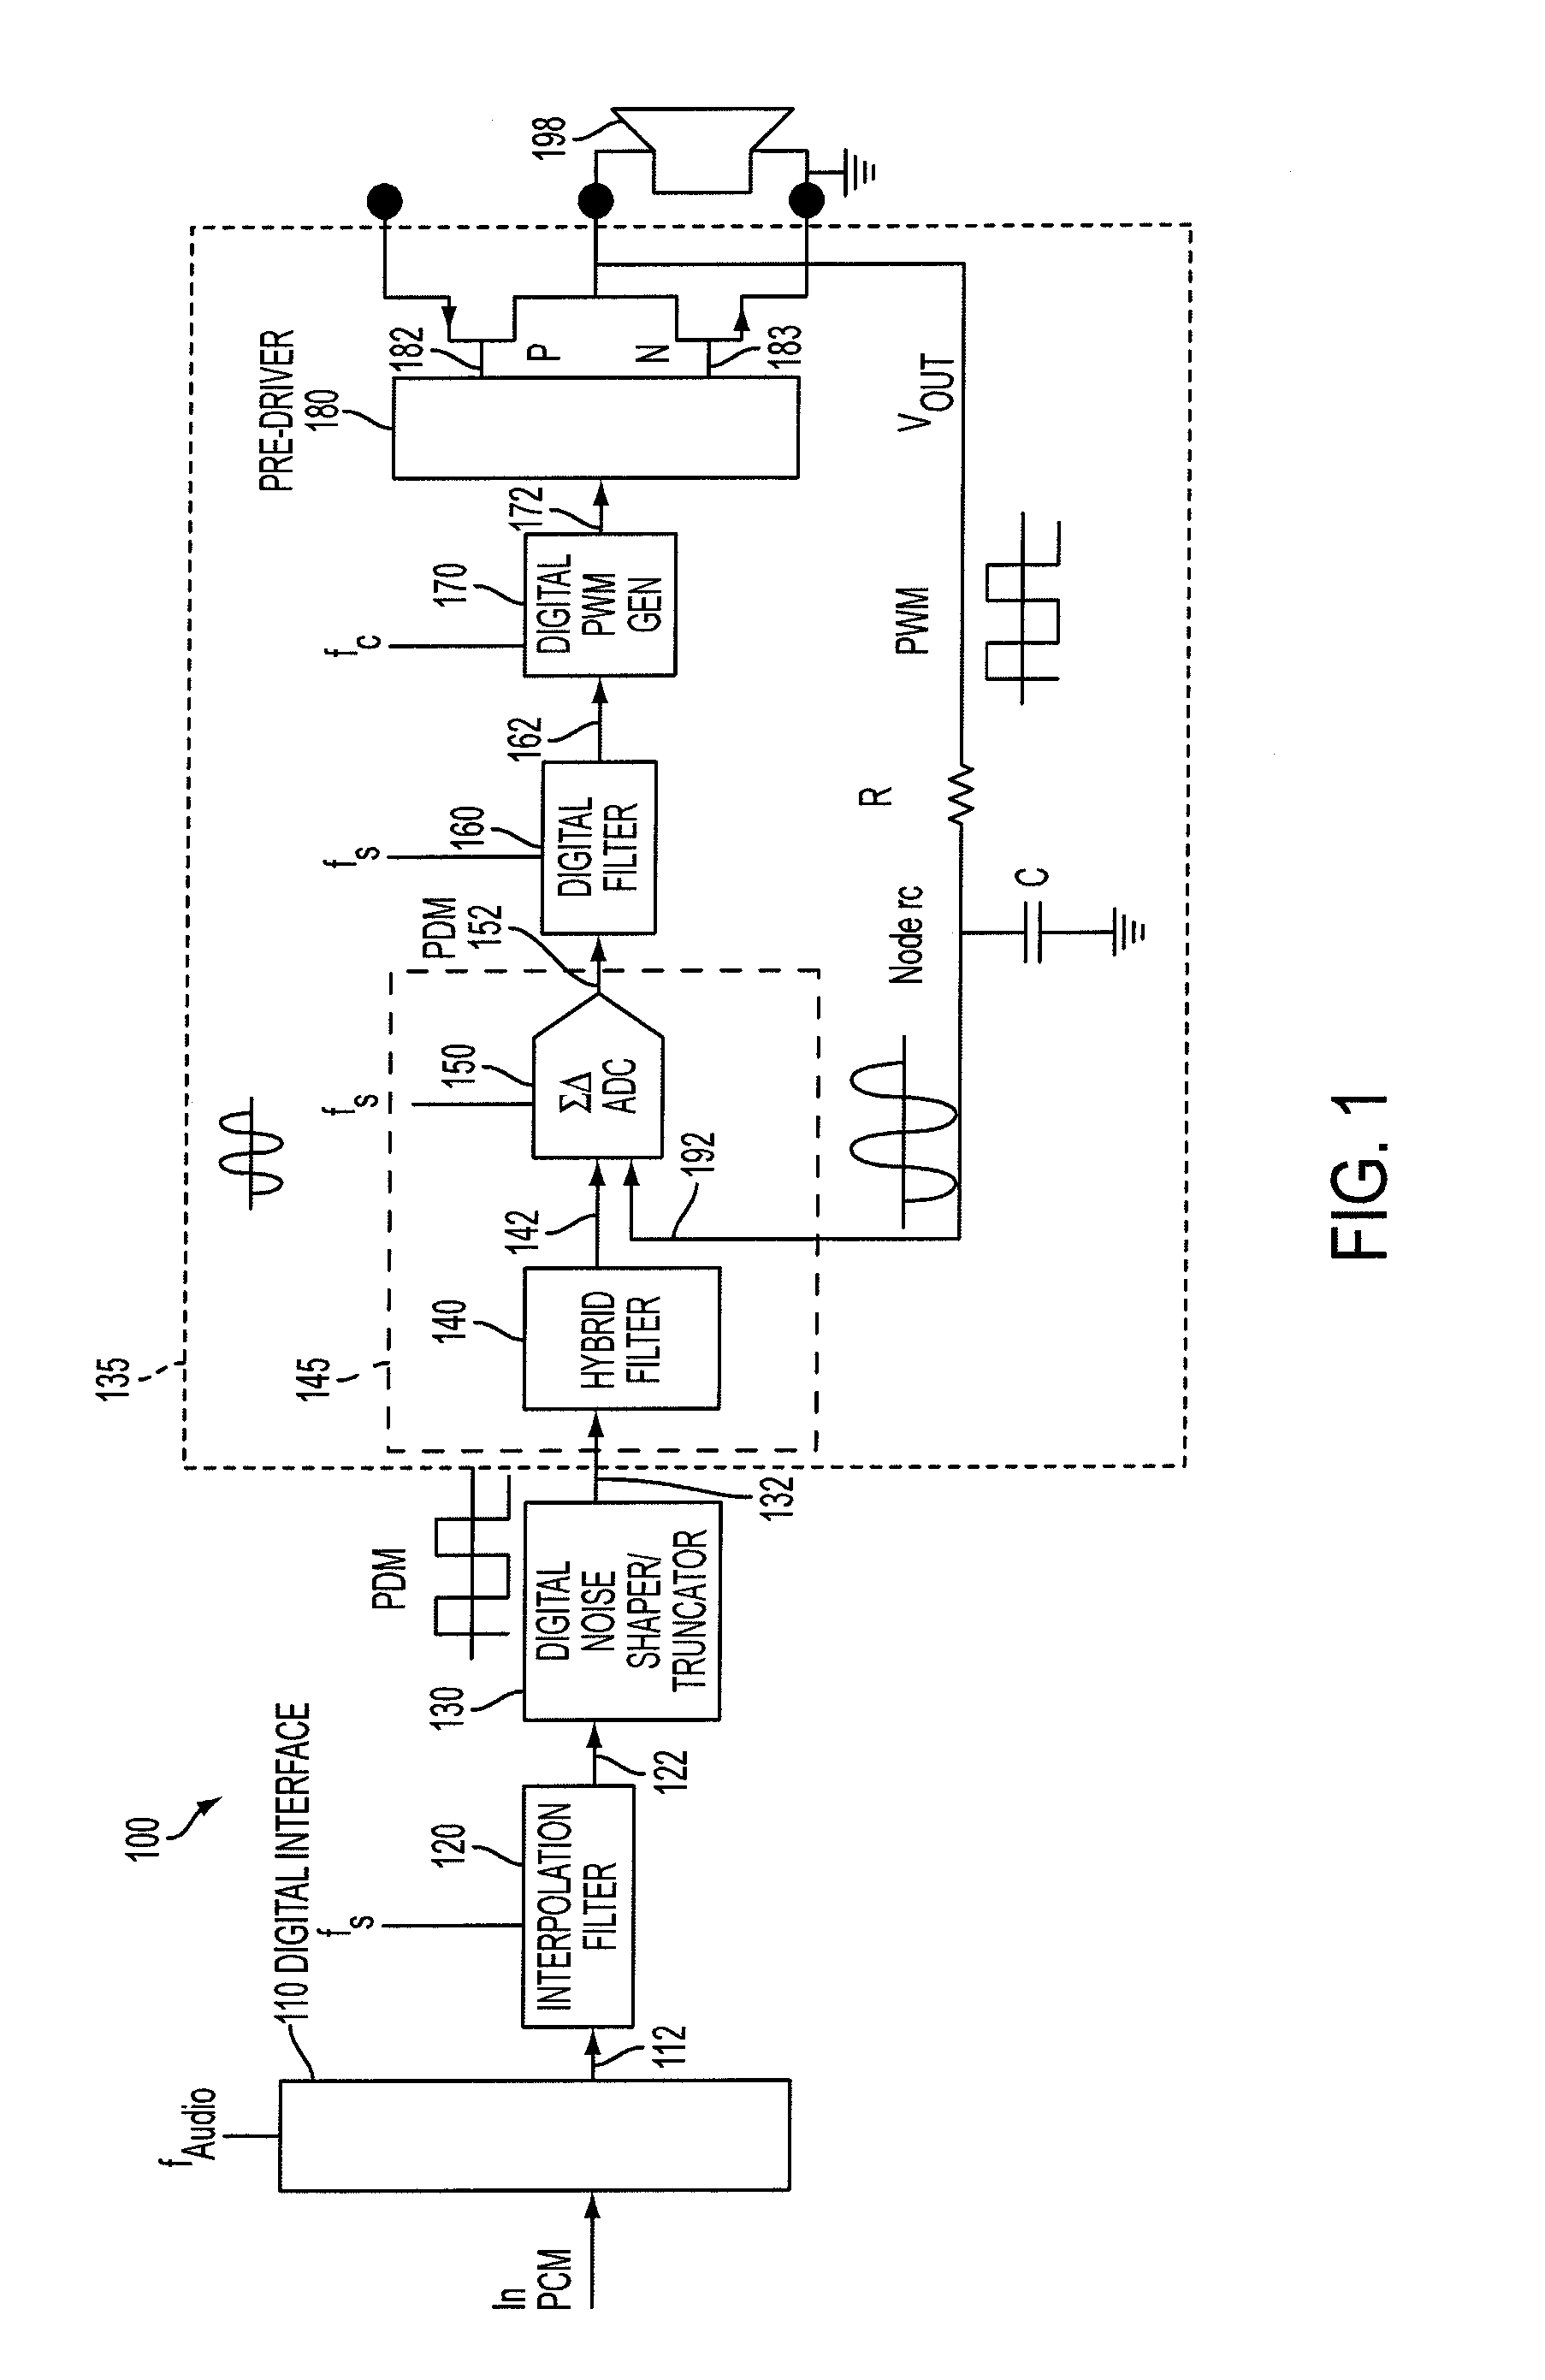 Amplifier with digital input and digital PWM control loop